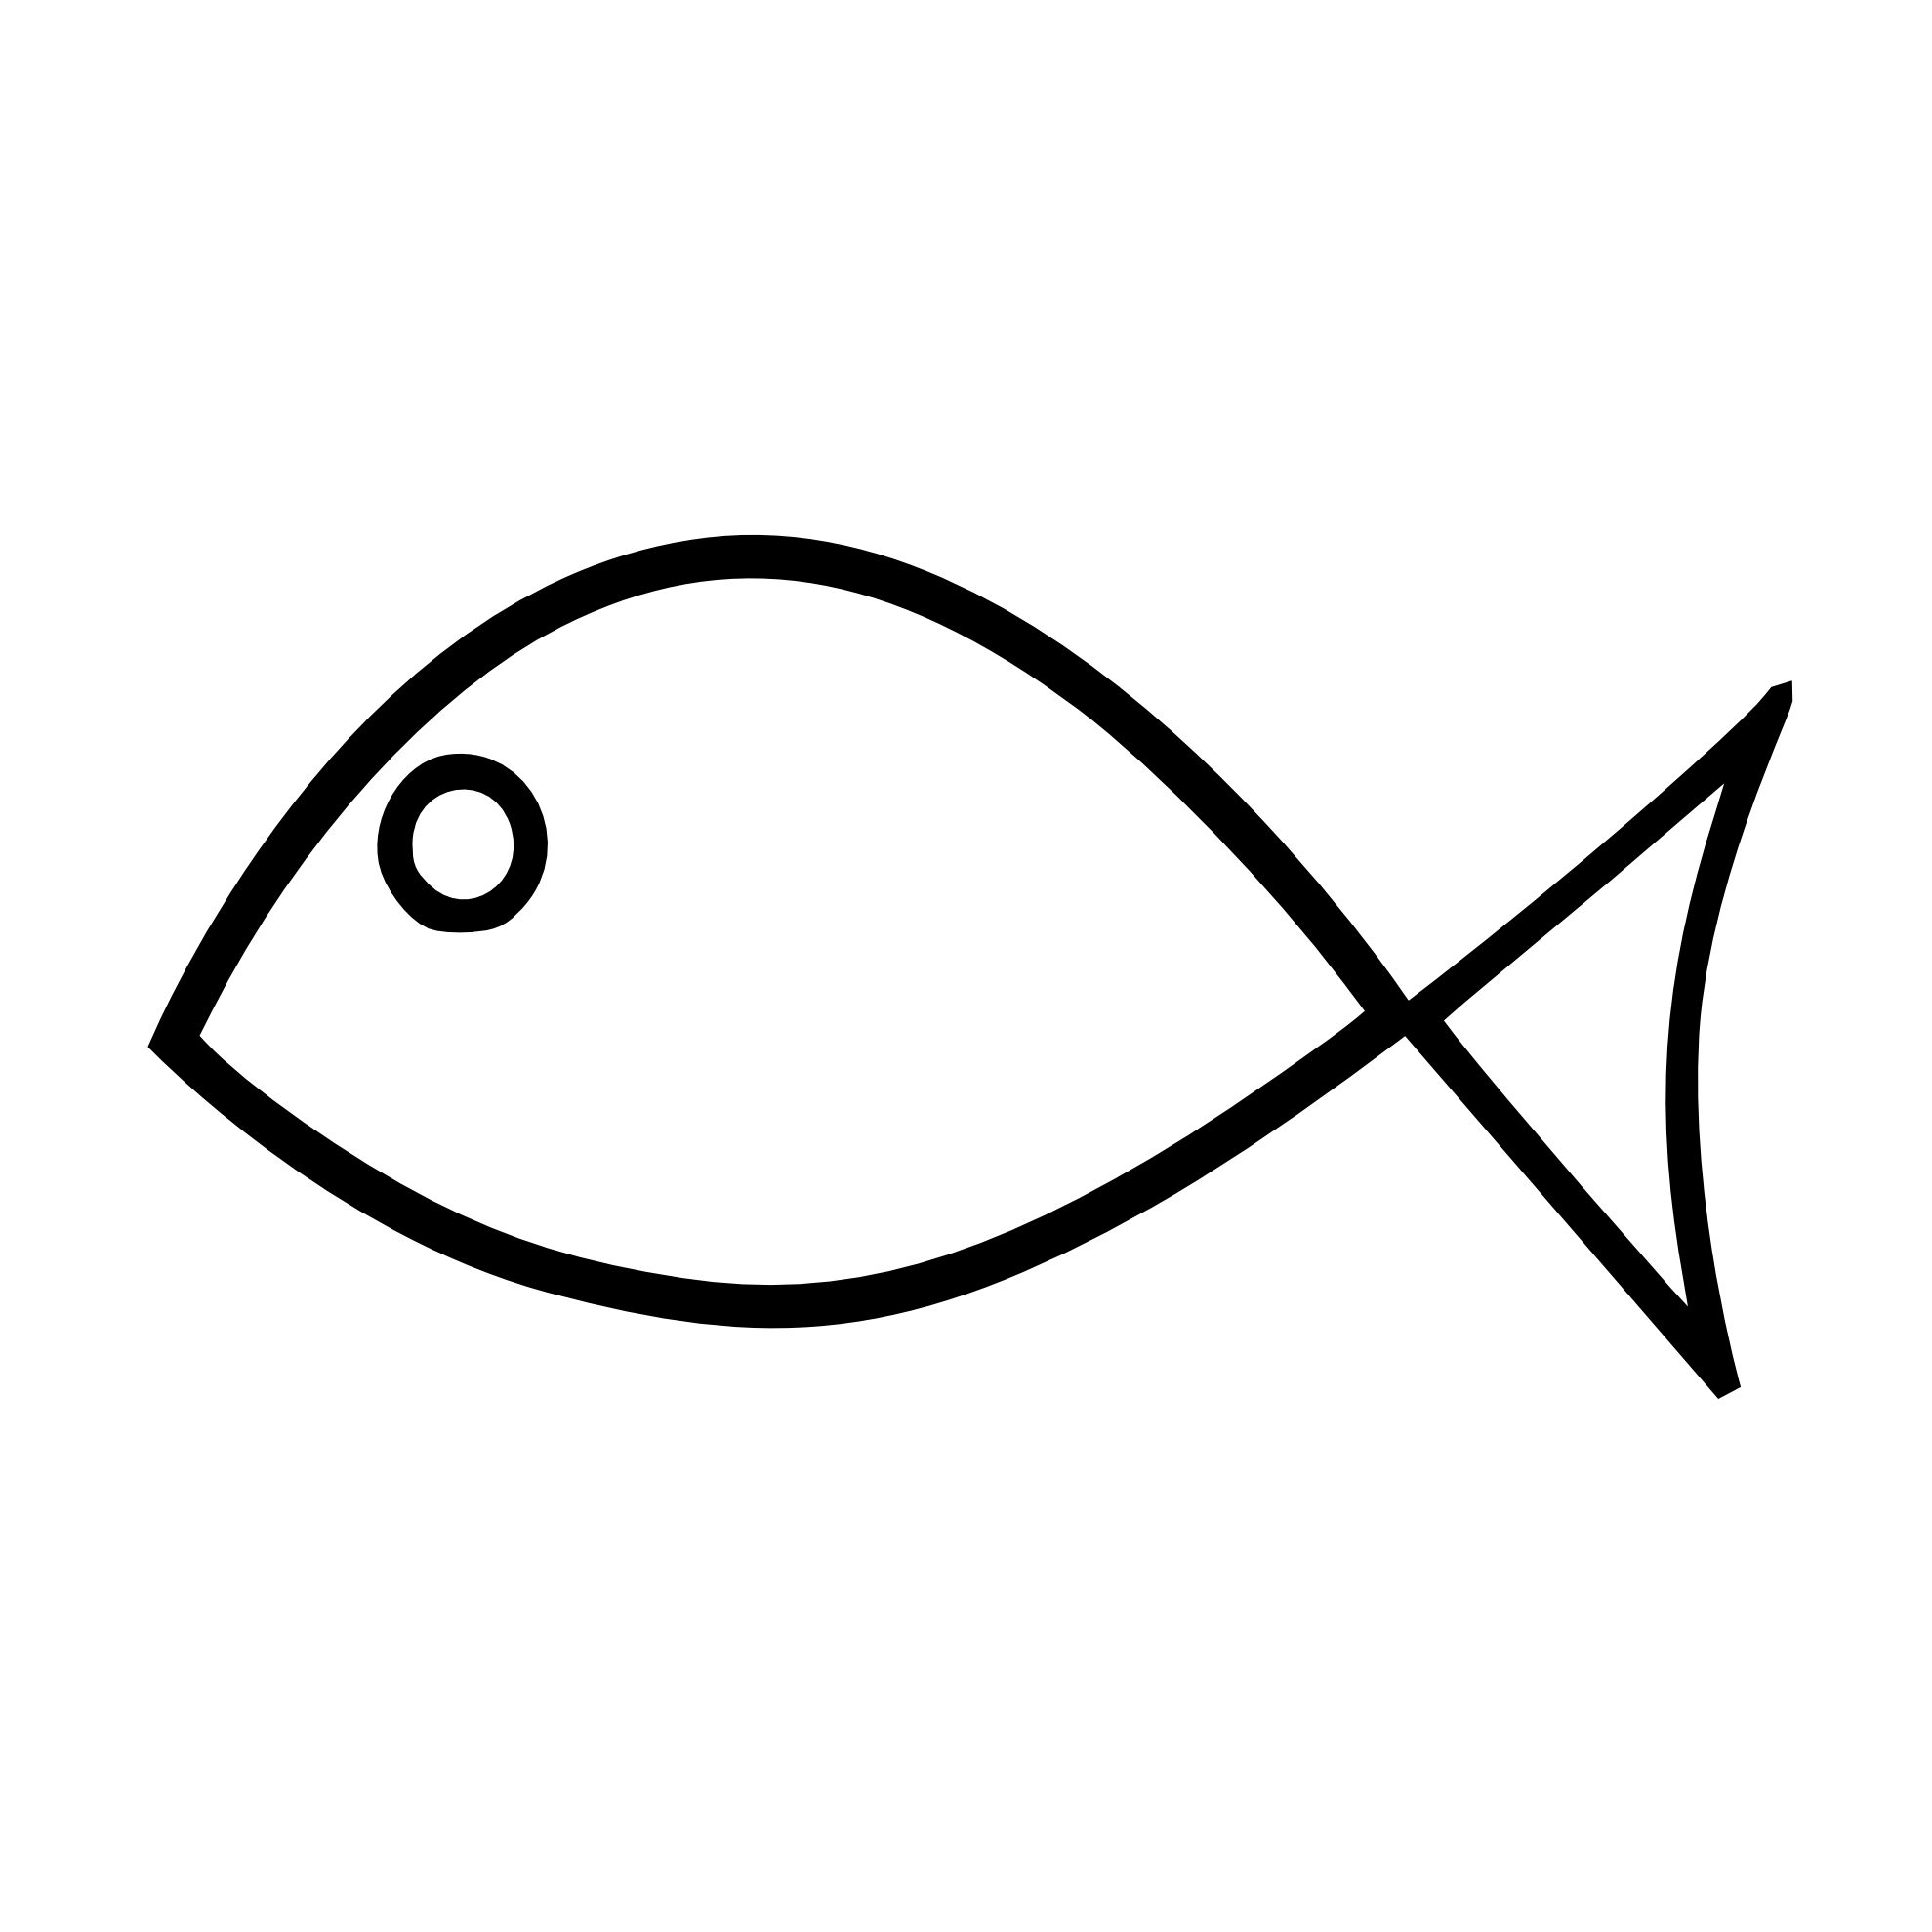 Fish drawings search loon. Google clipart line